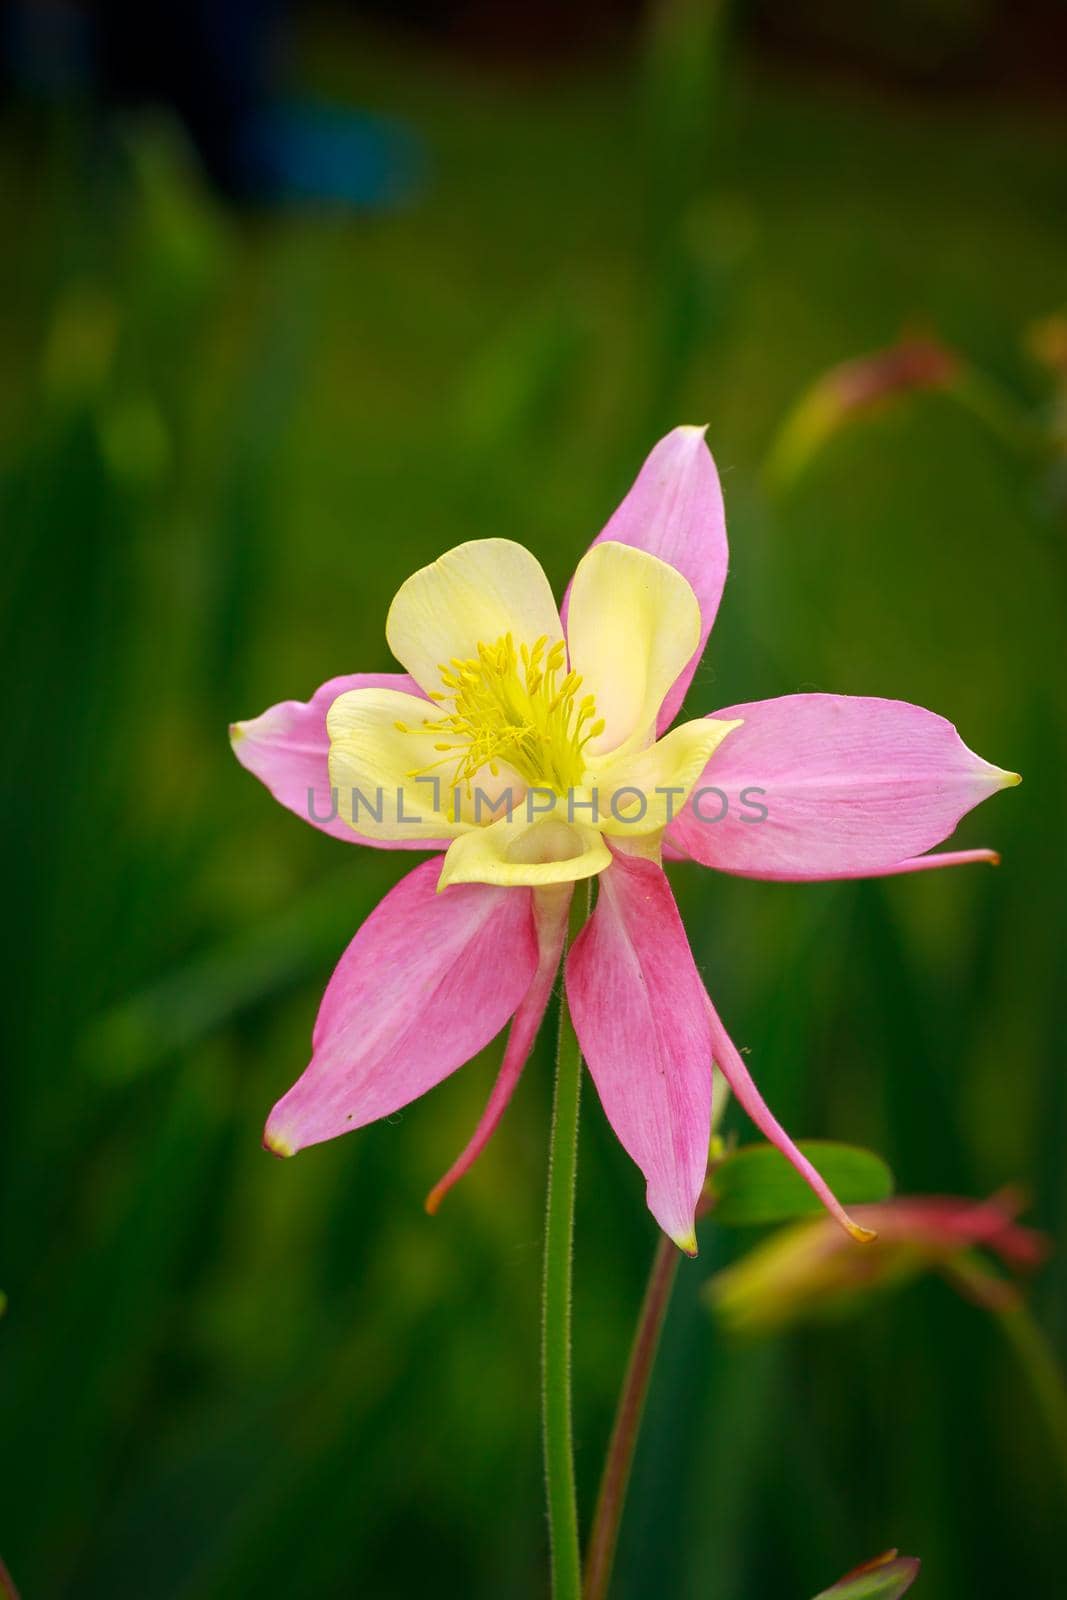 Aquilegia flower commonly known as columbine or granny's bonnet.